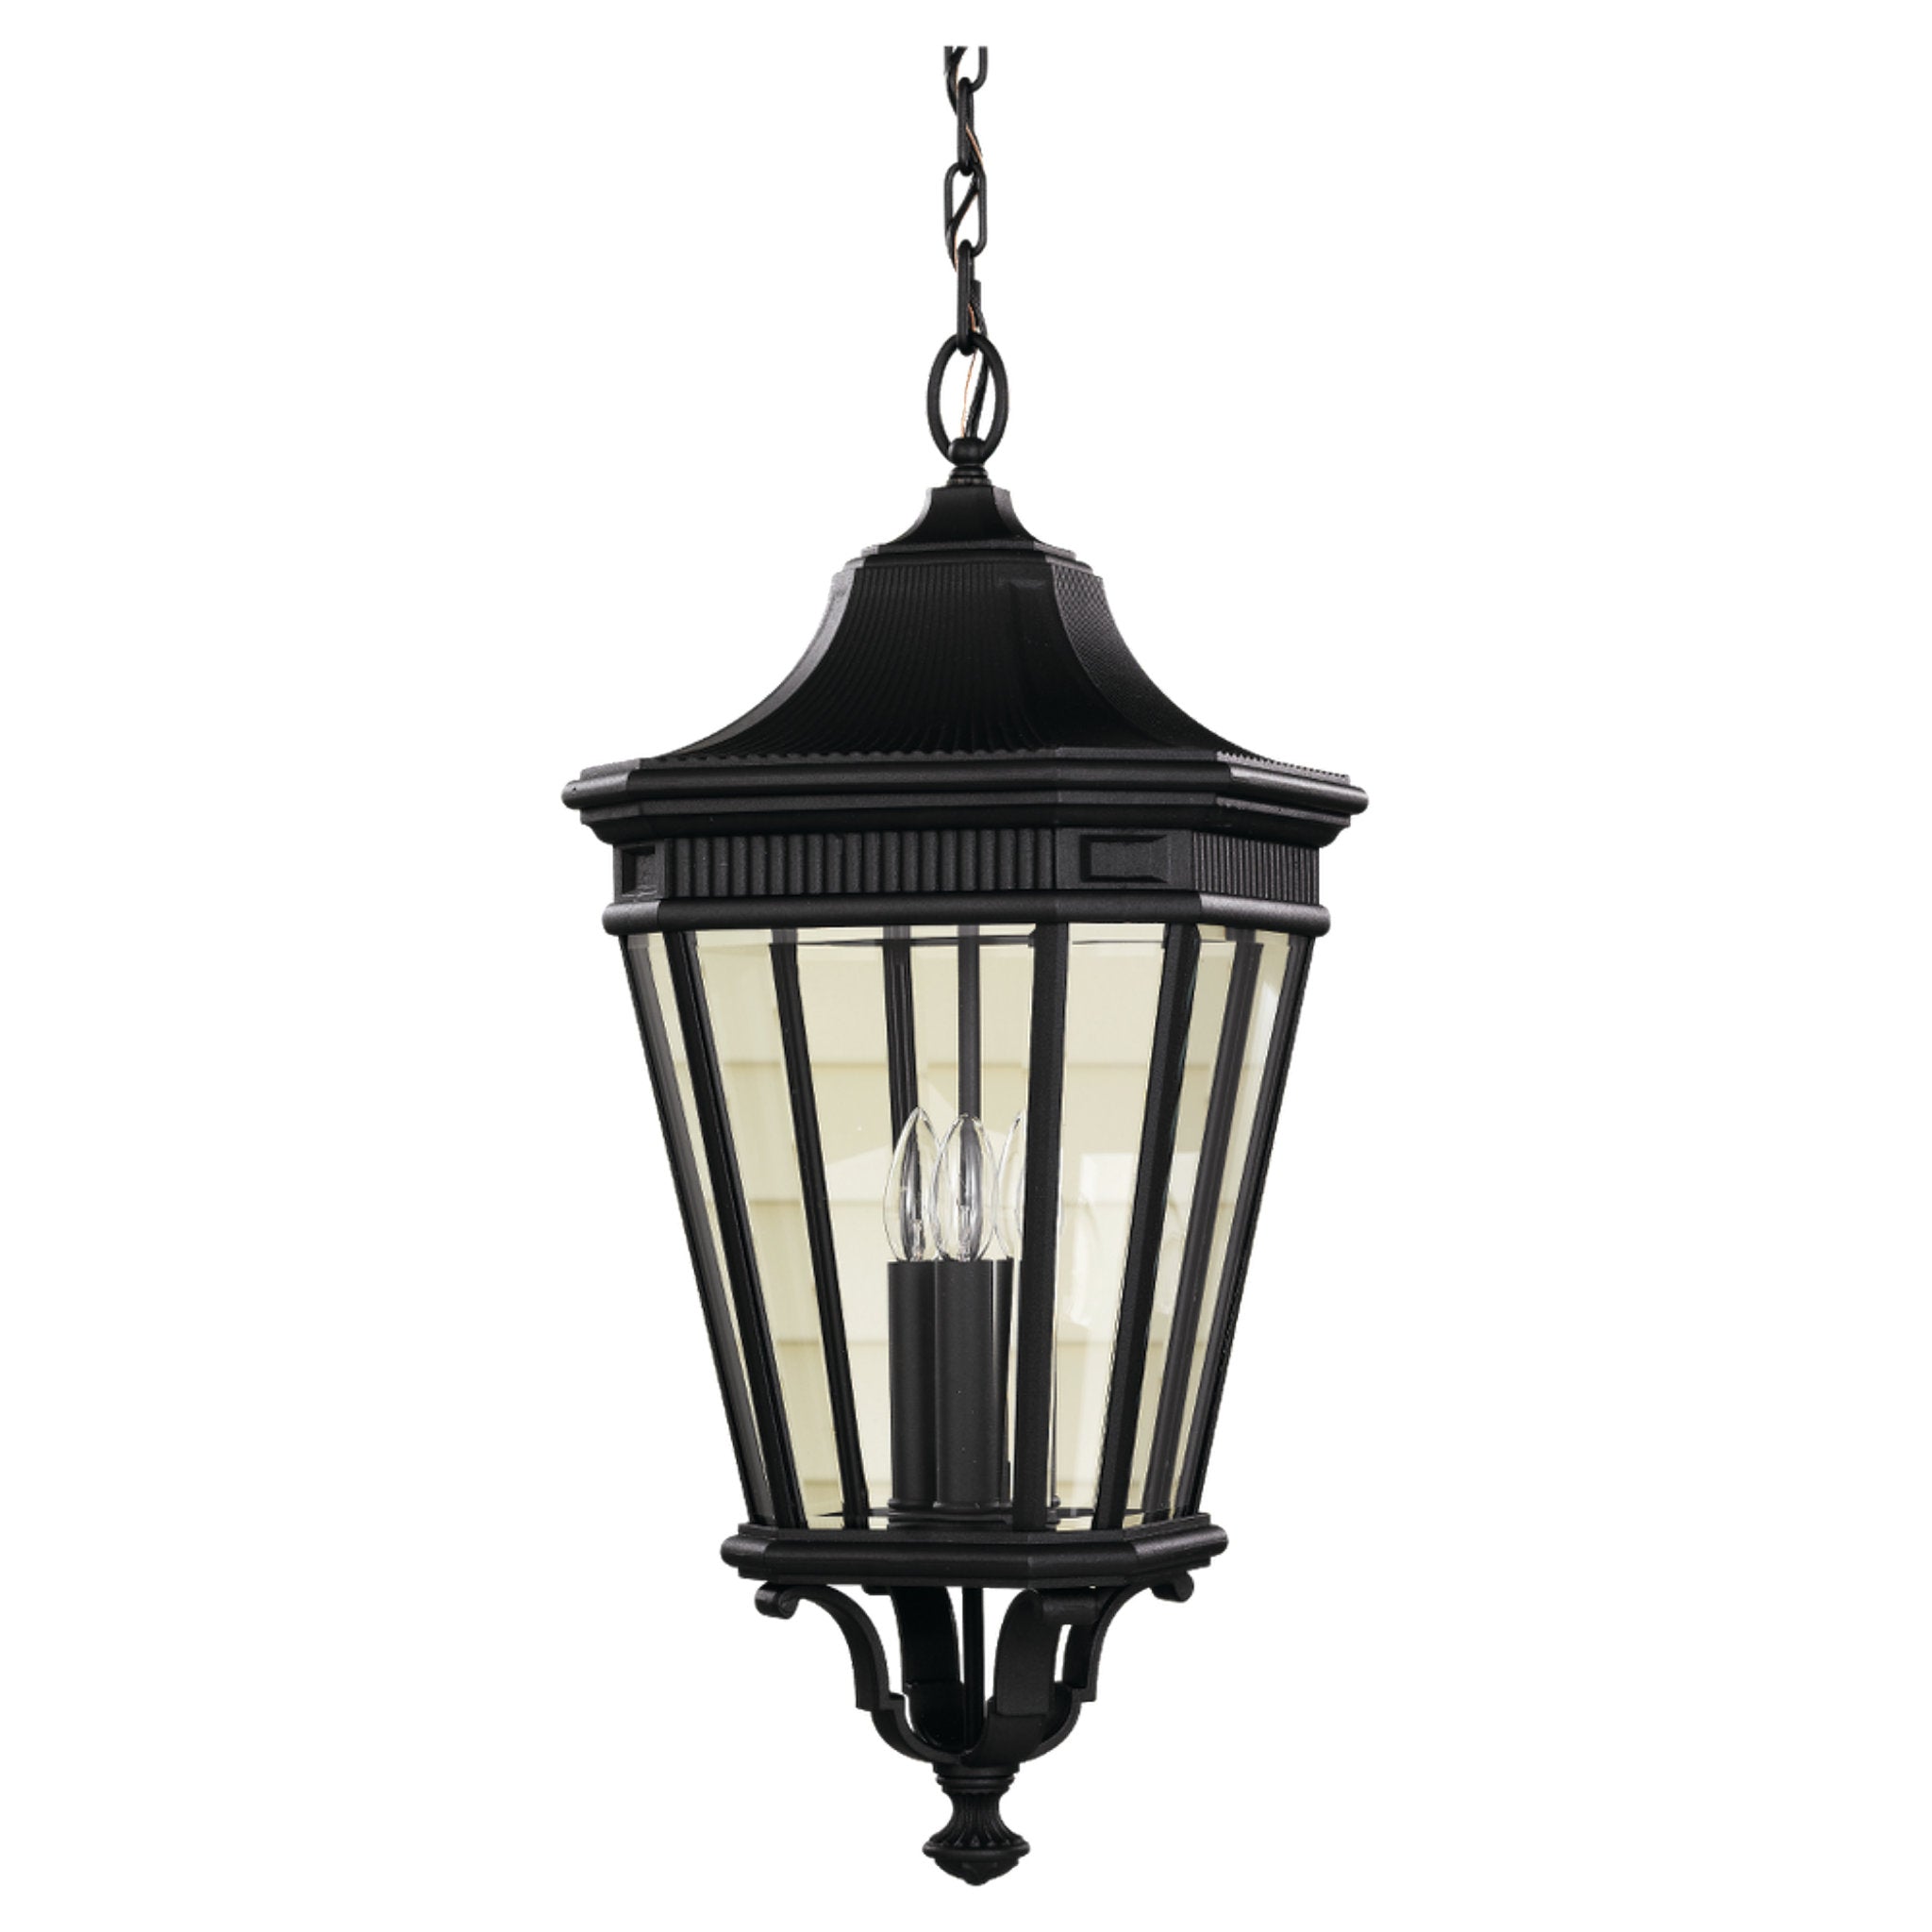 Cotswold Lane Medium Pendant Traditional Outdoor Fixture 12" Width 26.5" Height Aluminum Irregular Clear Beveled Shade in Black